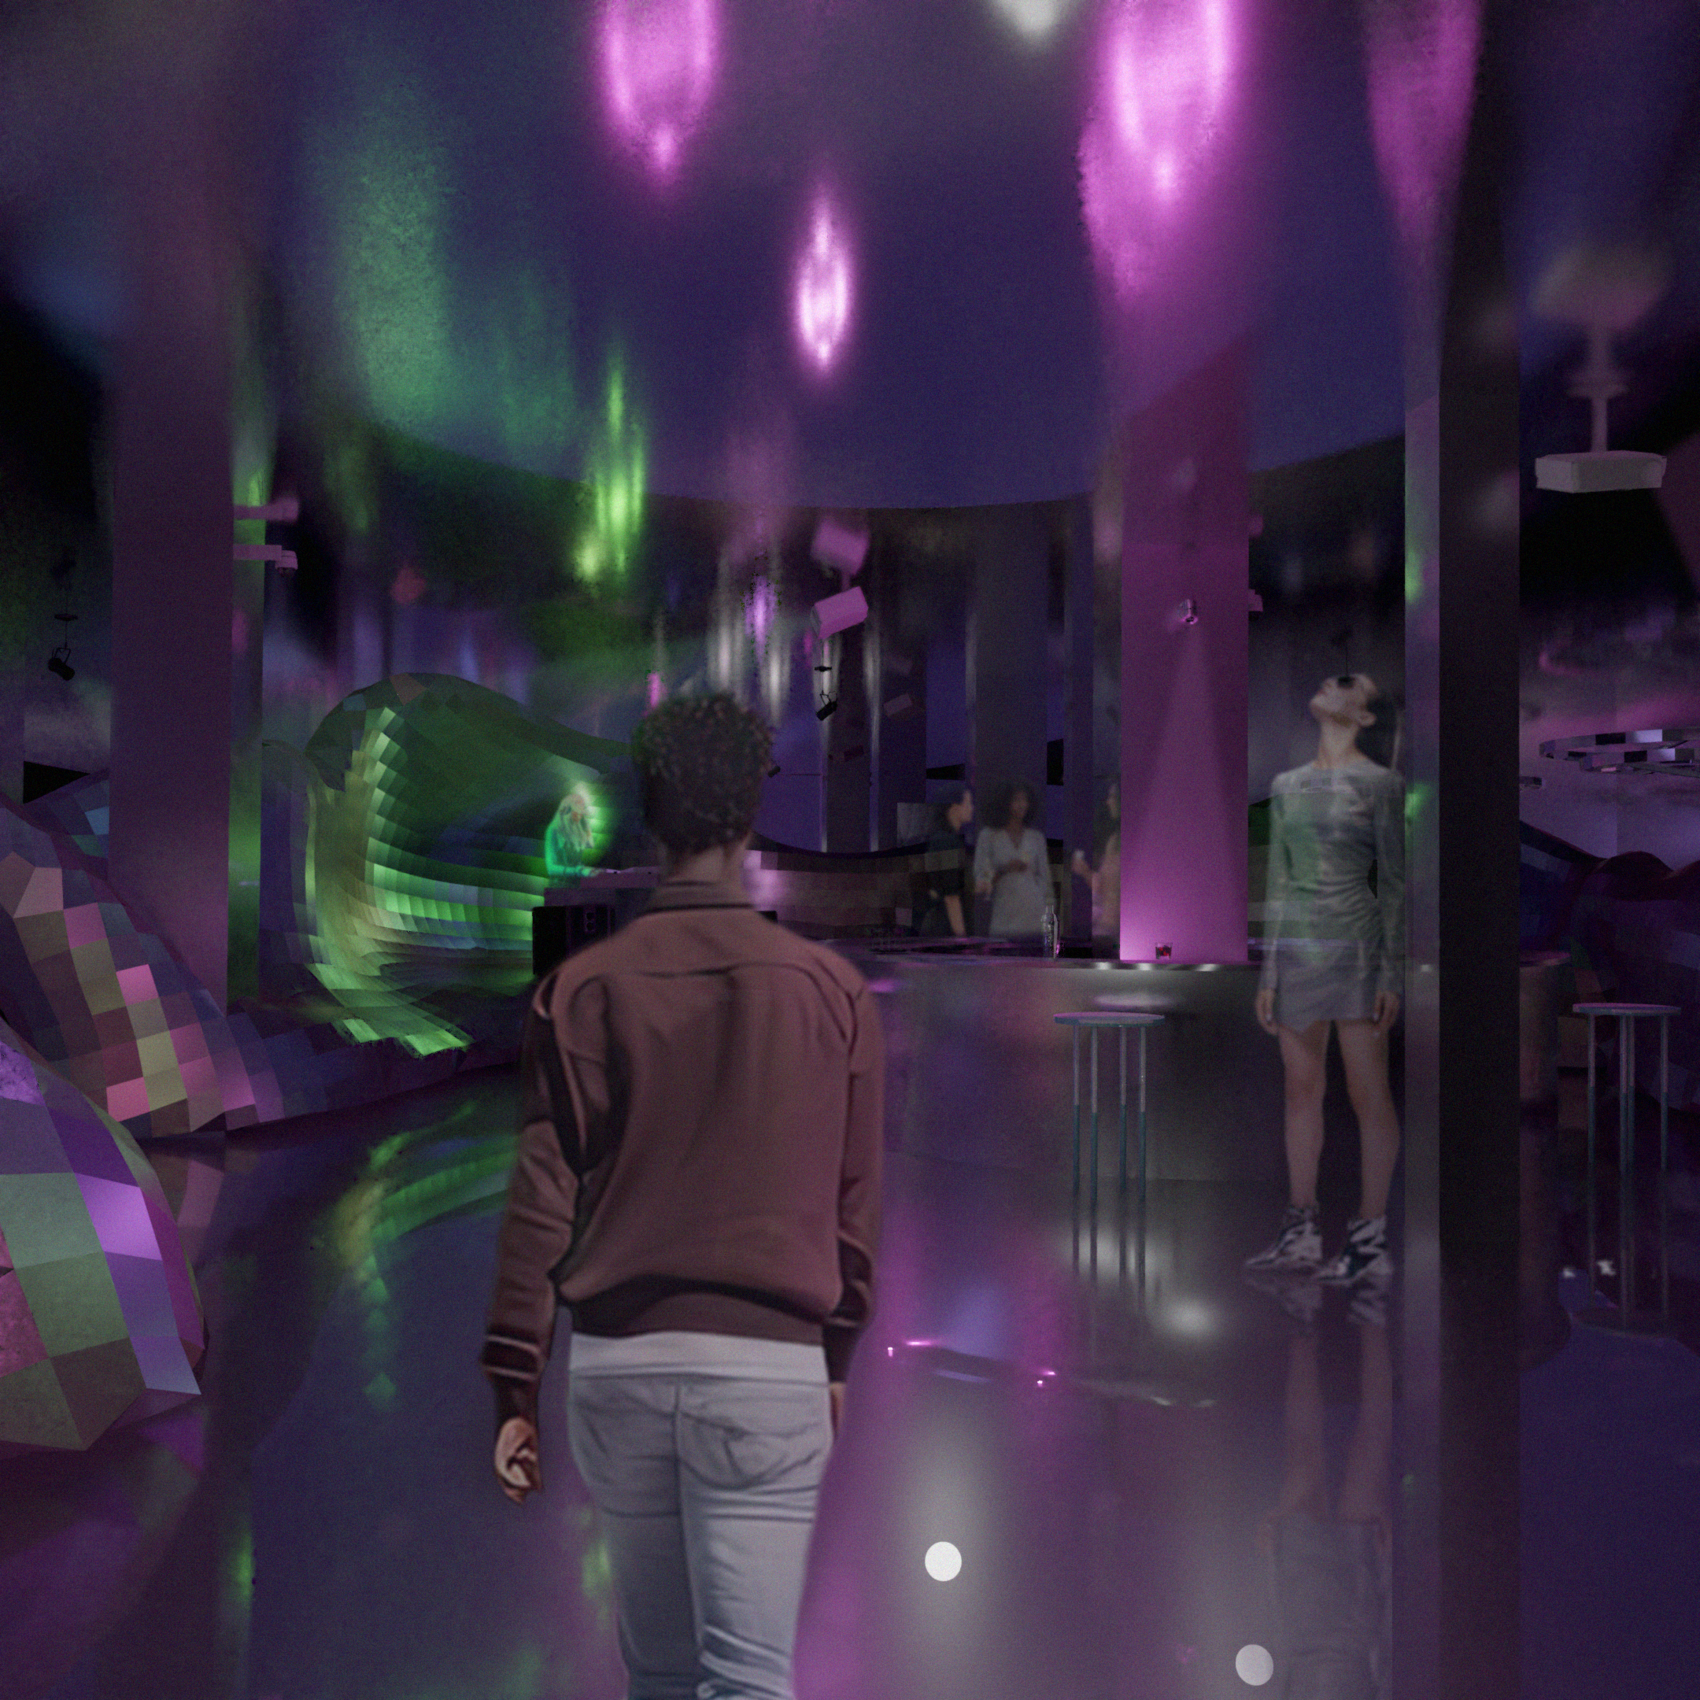 Visualisation of a nightclub proposal with a mosaik wall with colorful light and media reflected onto it. The space is metallic and merges media art with nightlife.